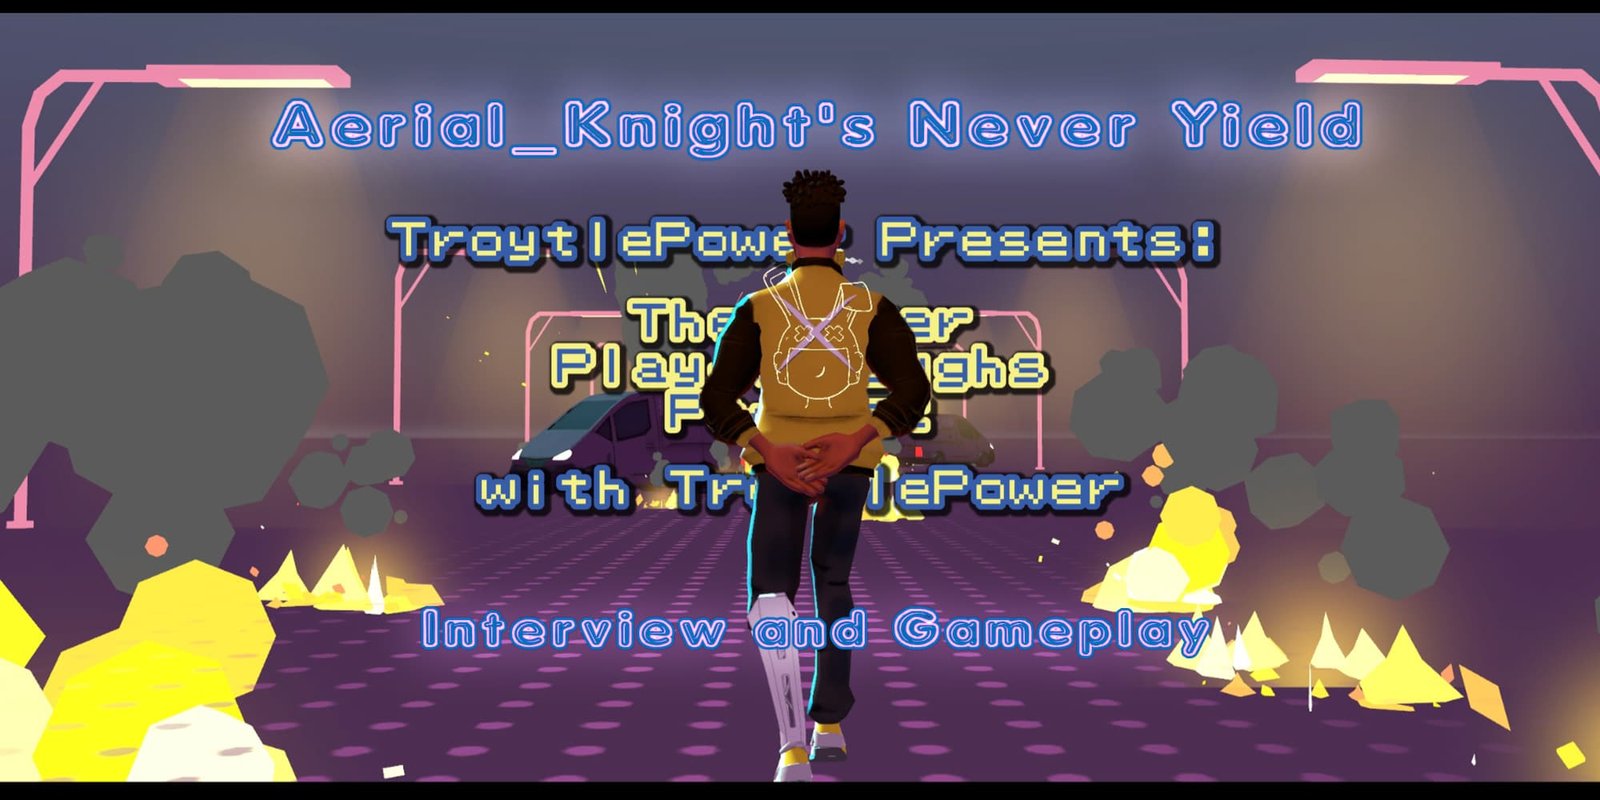 A chat with Neil Jones, aka @Aerial_Knight, about Aerial_Knight’s Never Yield